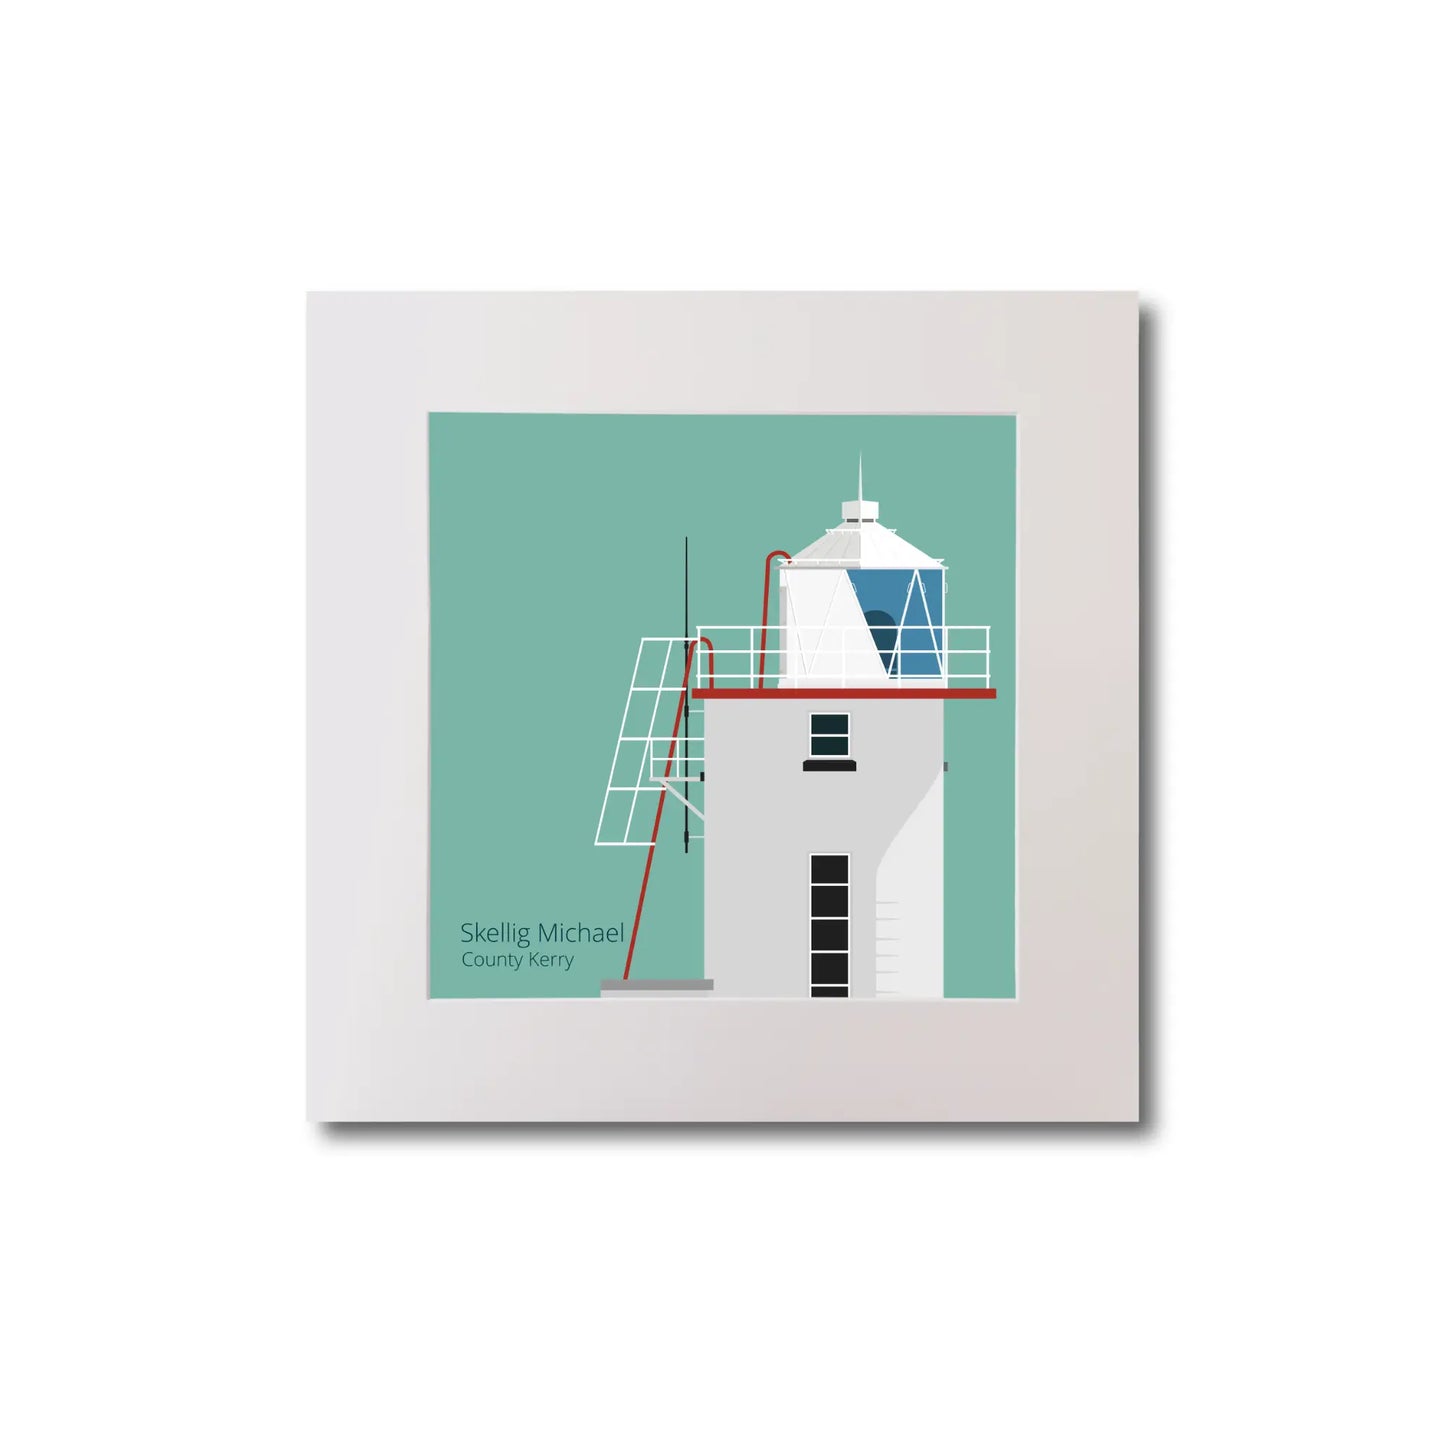 Illustration of Skellig Michael lighthouse on an ocean green background, mounted and measuring 20x20cm.